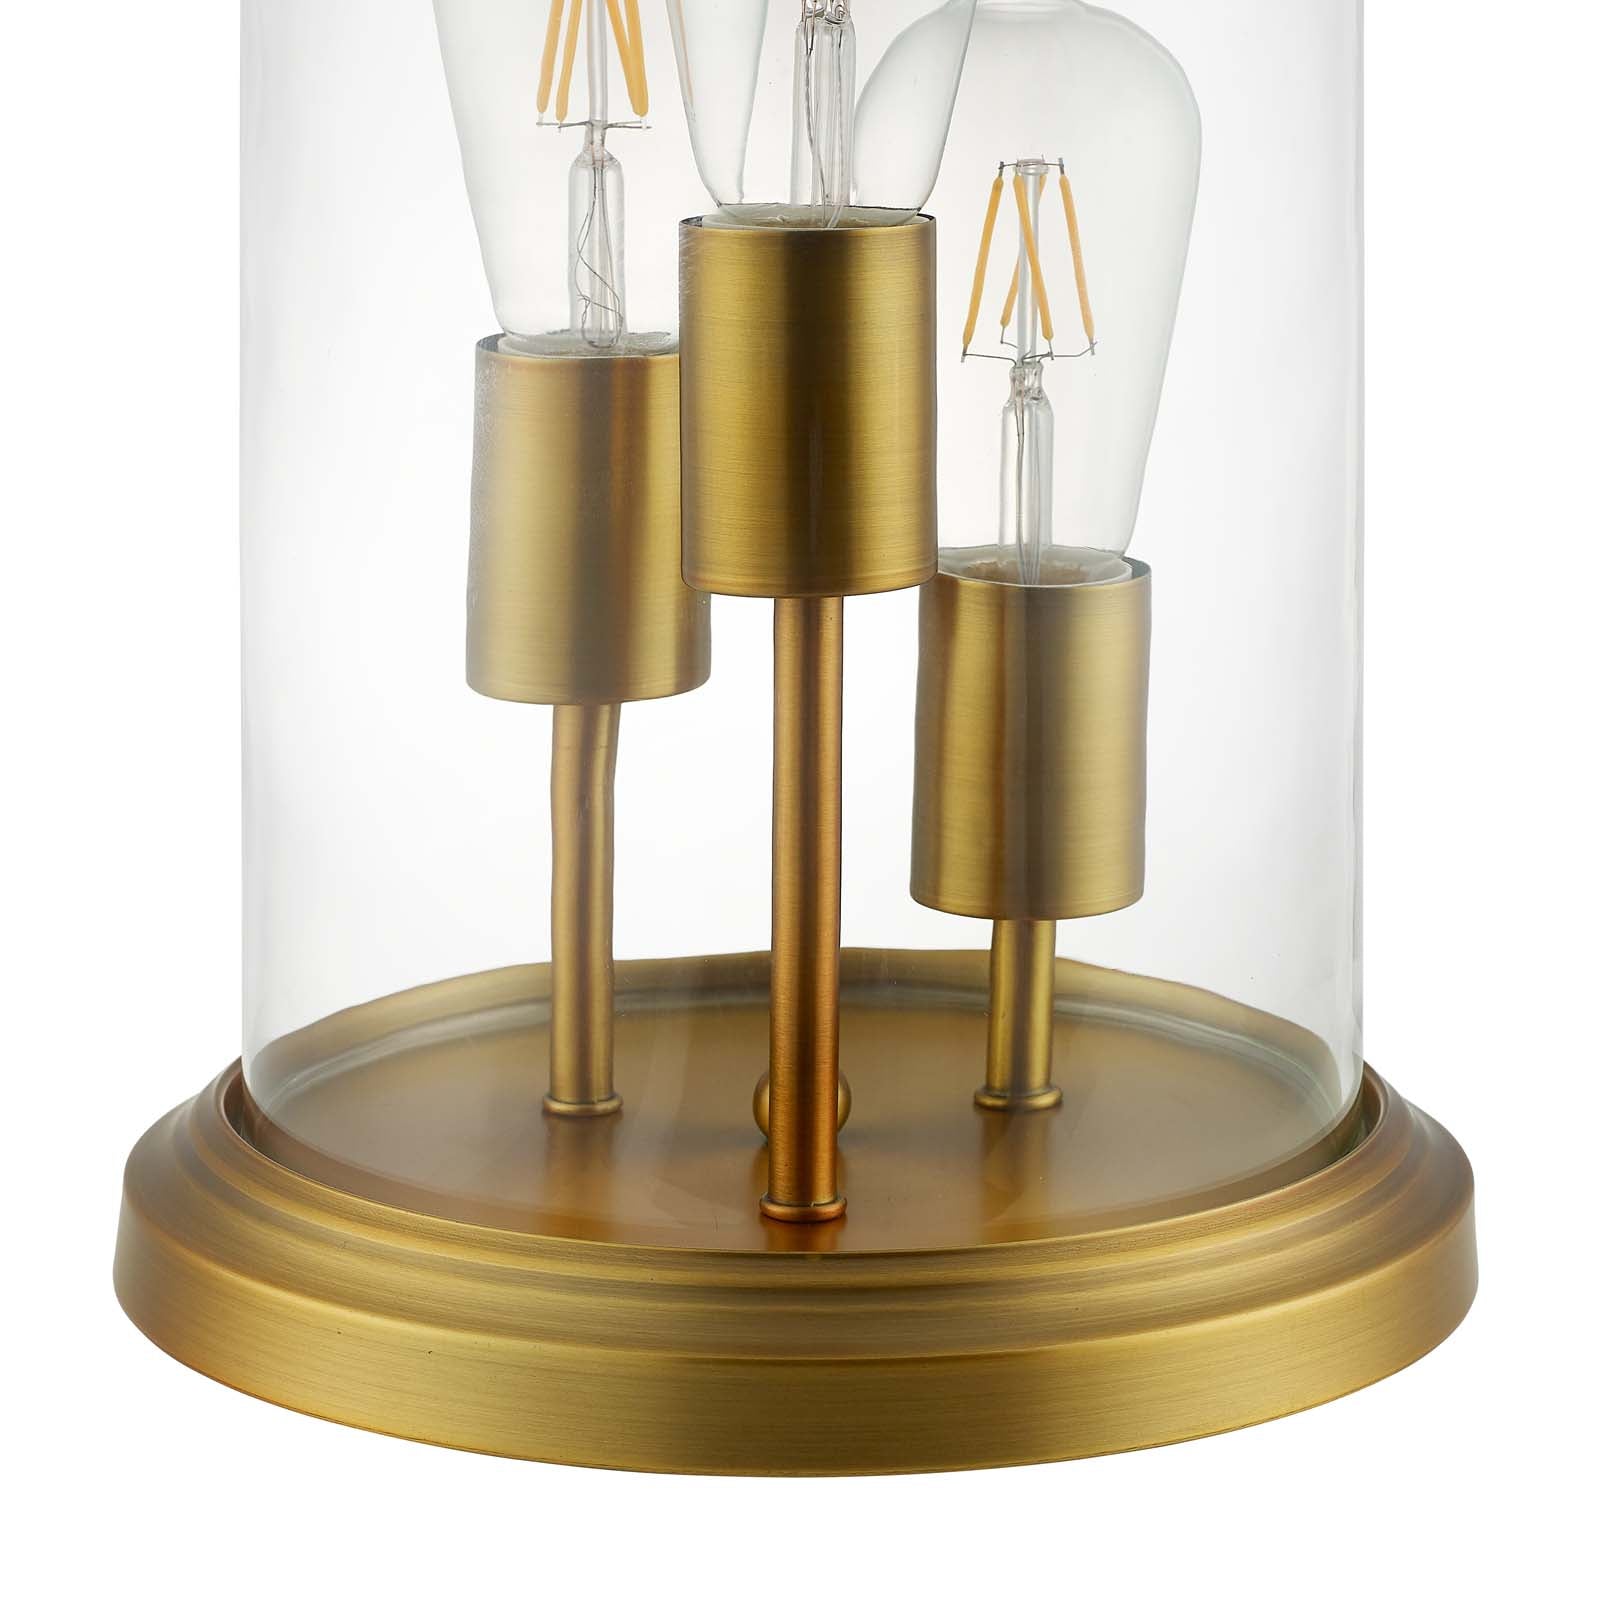 Admiration Cloche Table Lamp - East Shore Modern Home Furnishings